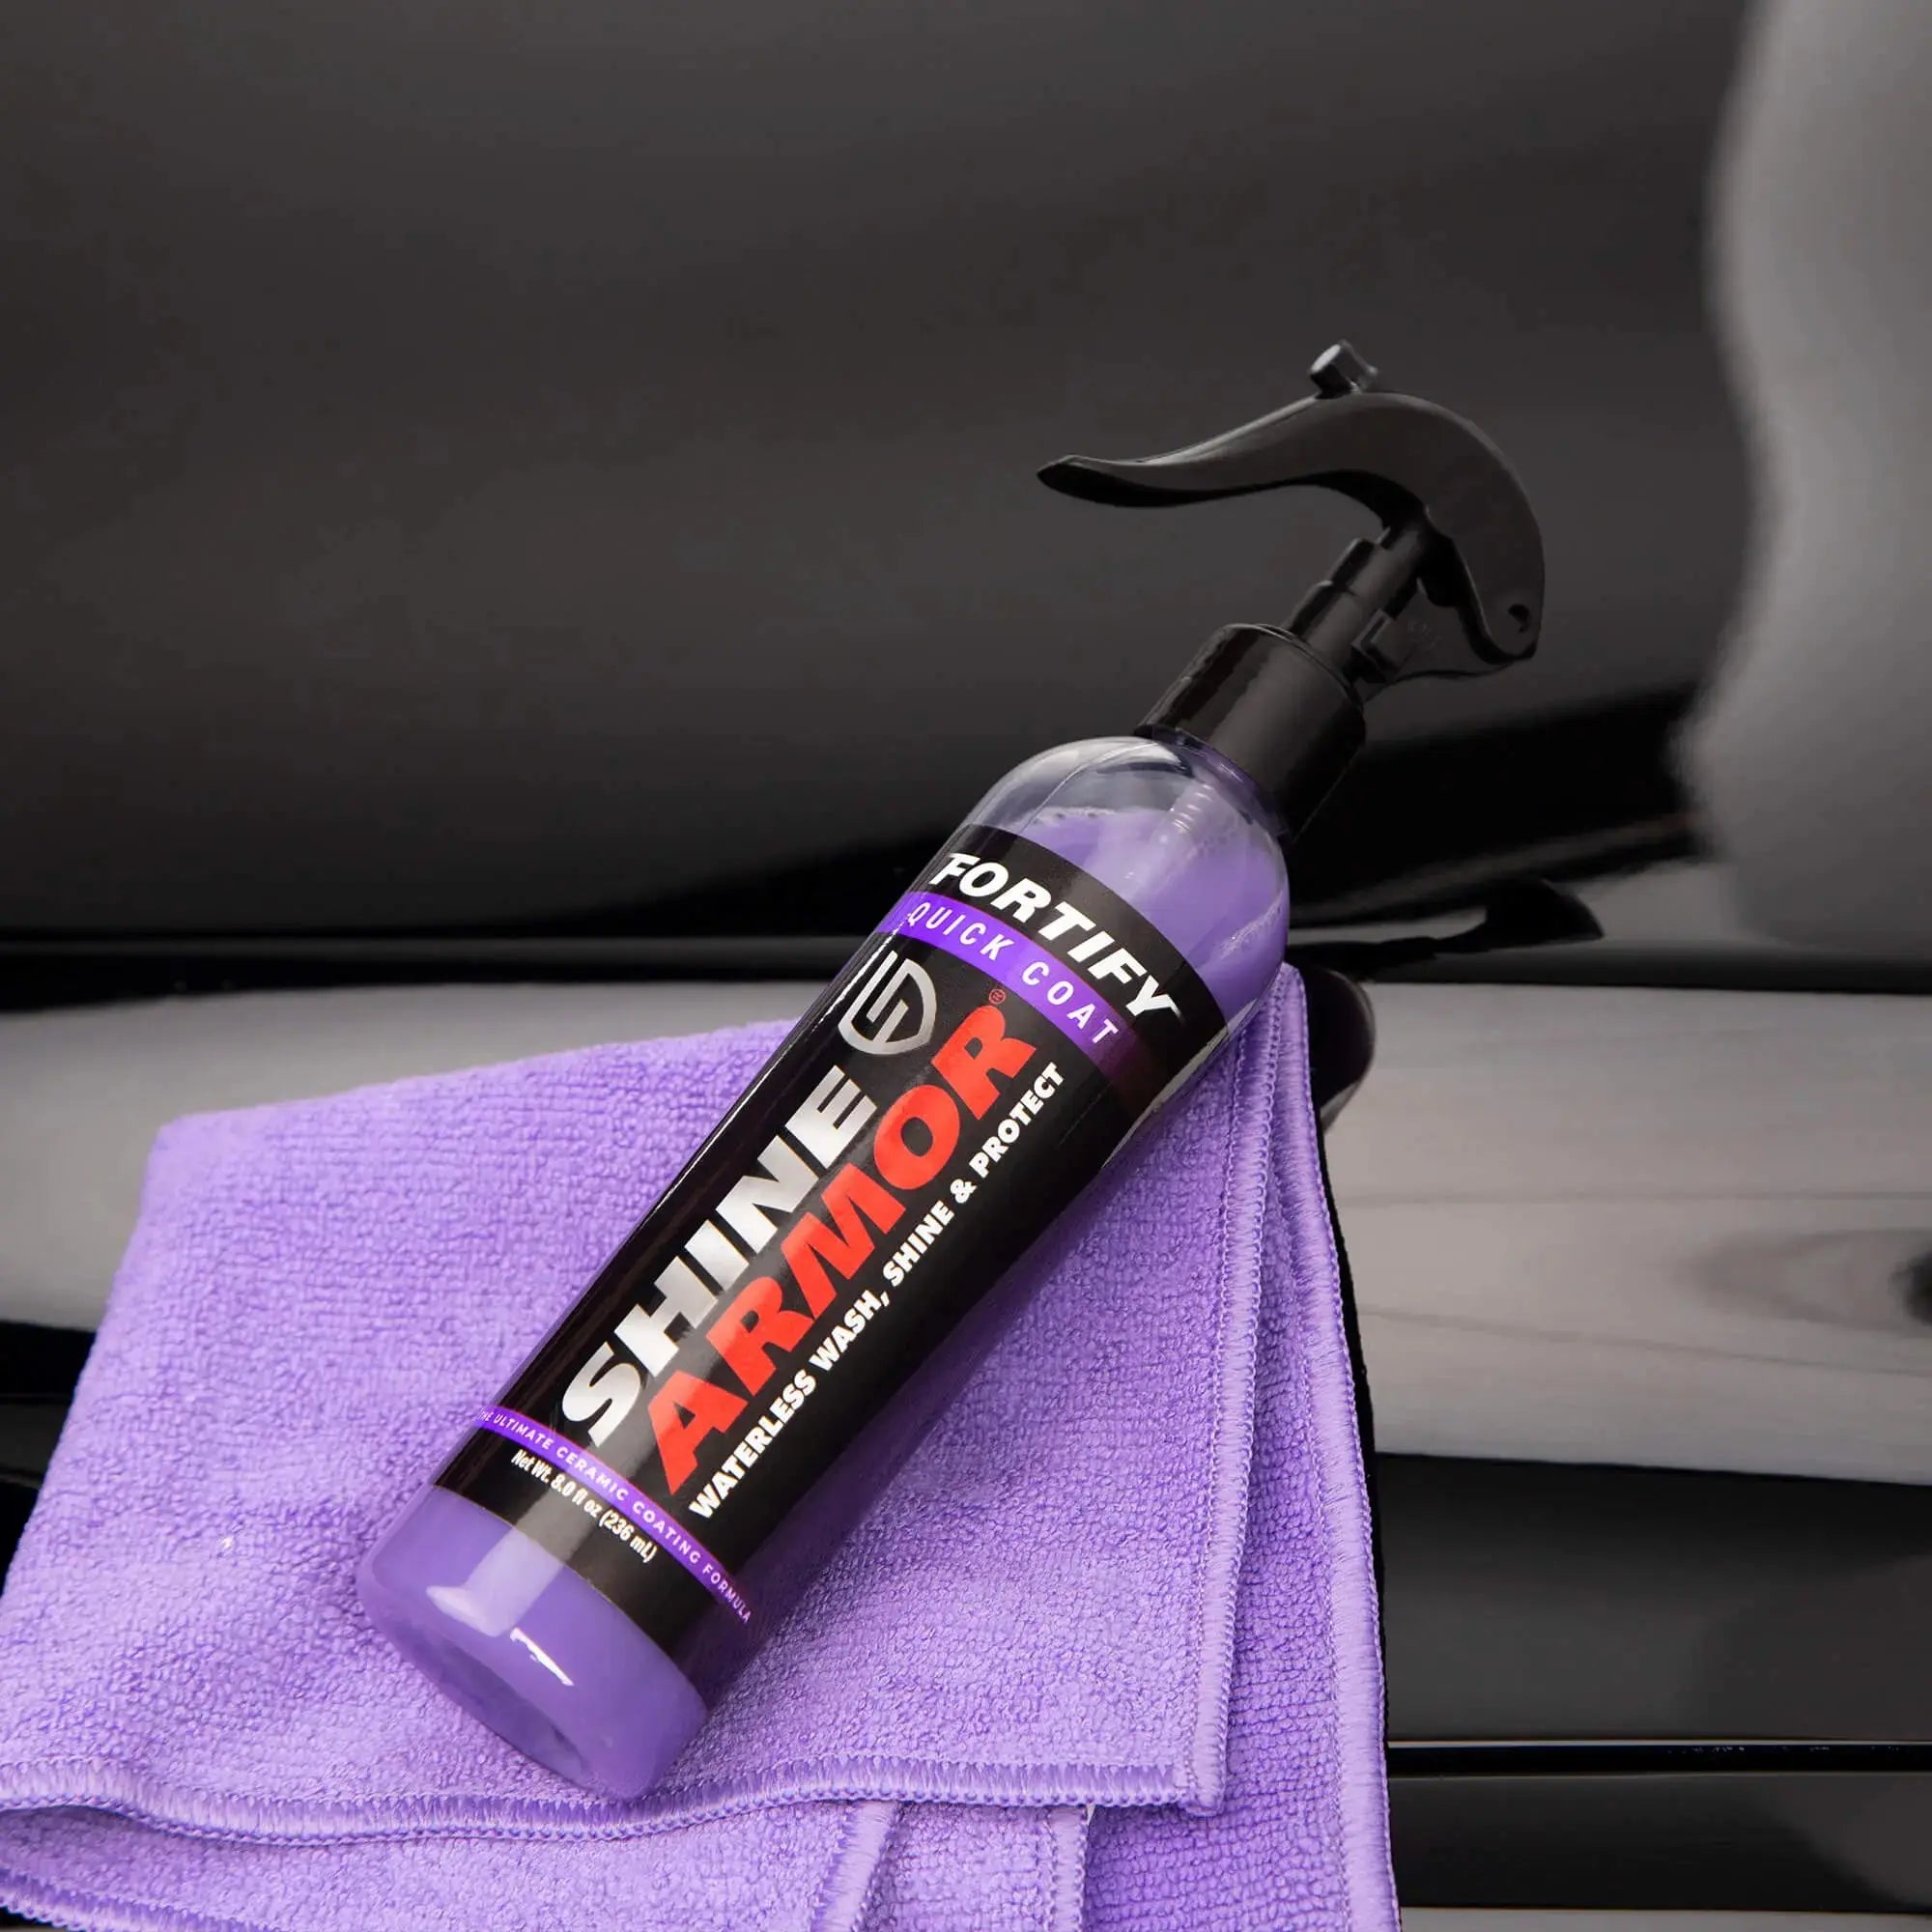 Protective car coating - Fortify Quick Coat